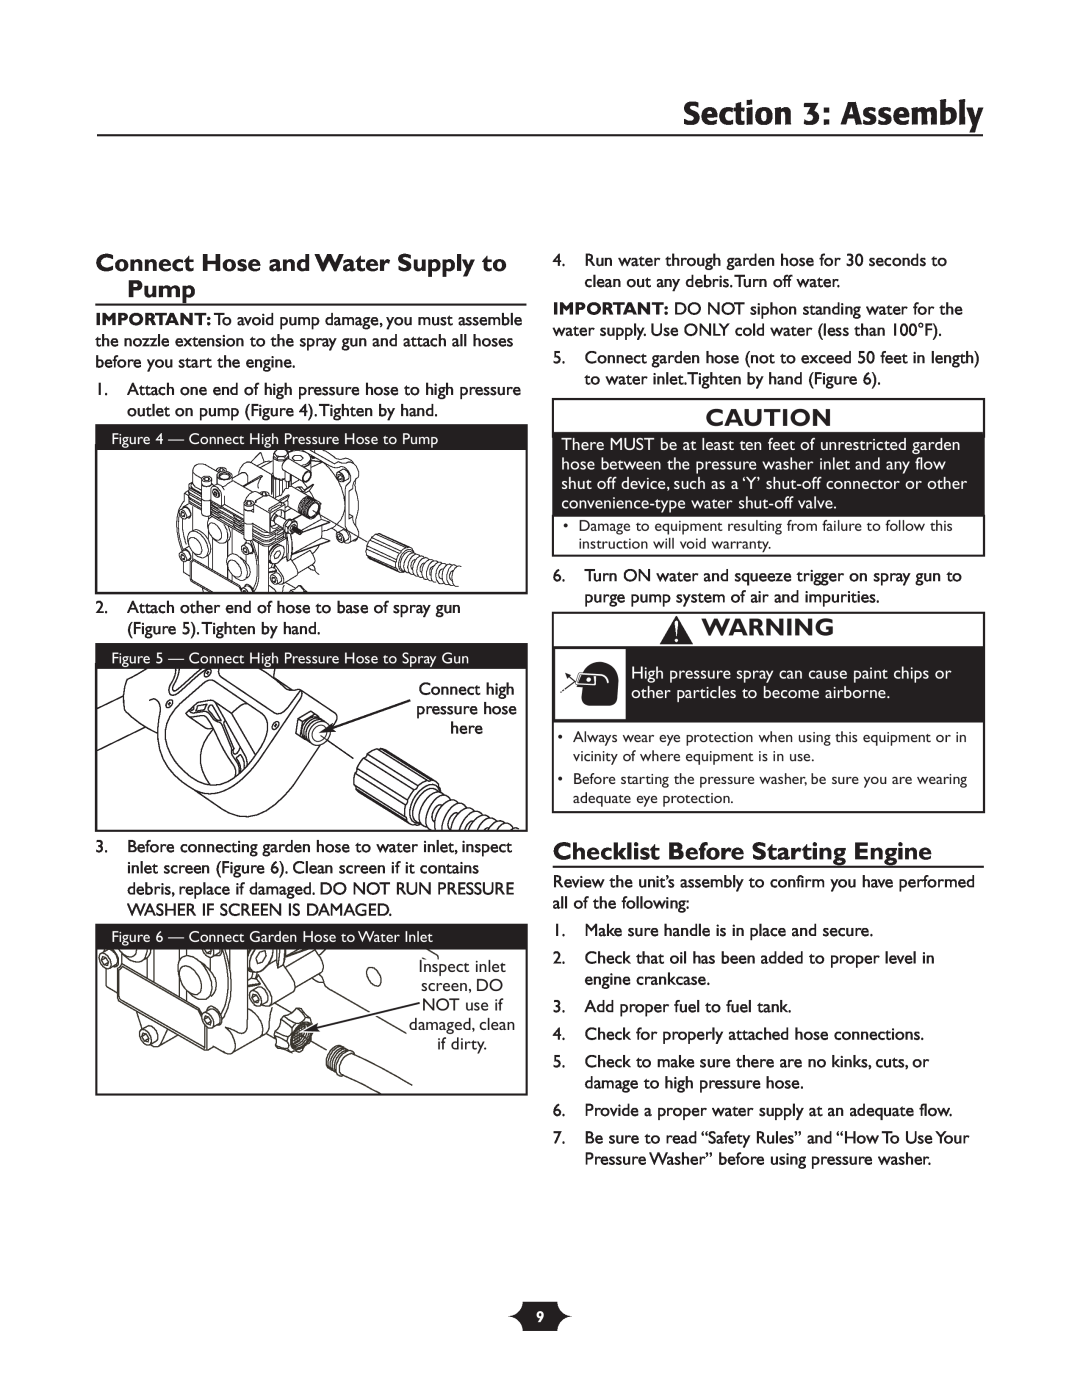 Troy-Bilt 020242-4 manual Connect Hose and Water Supply to Pump, Checklist Before Starting Engine, Assembly 